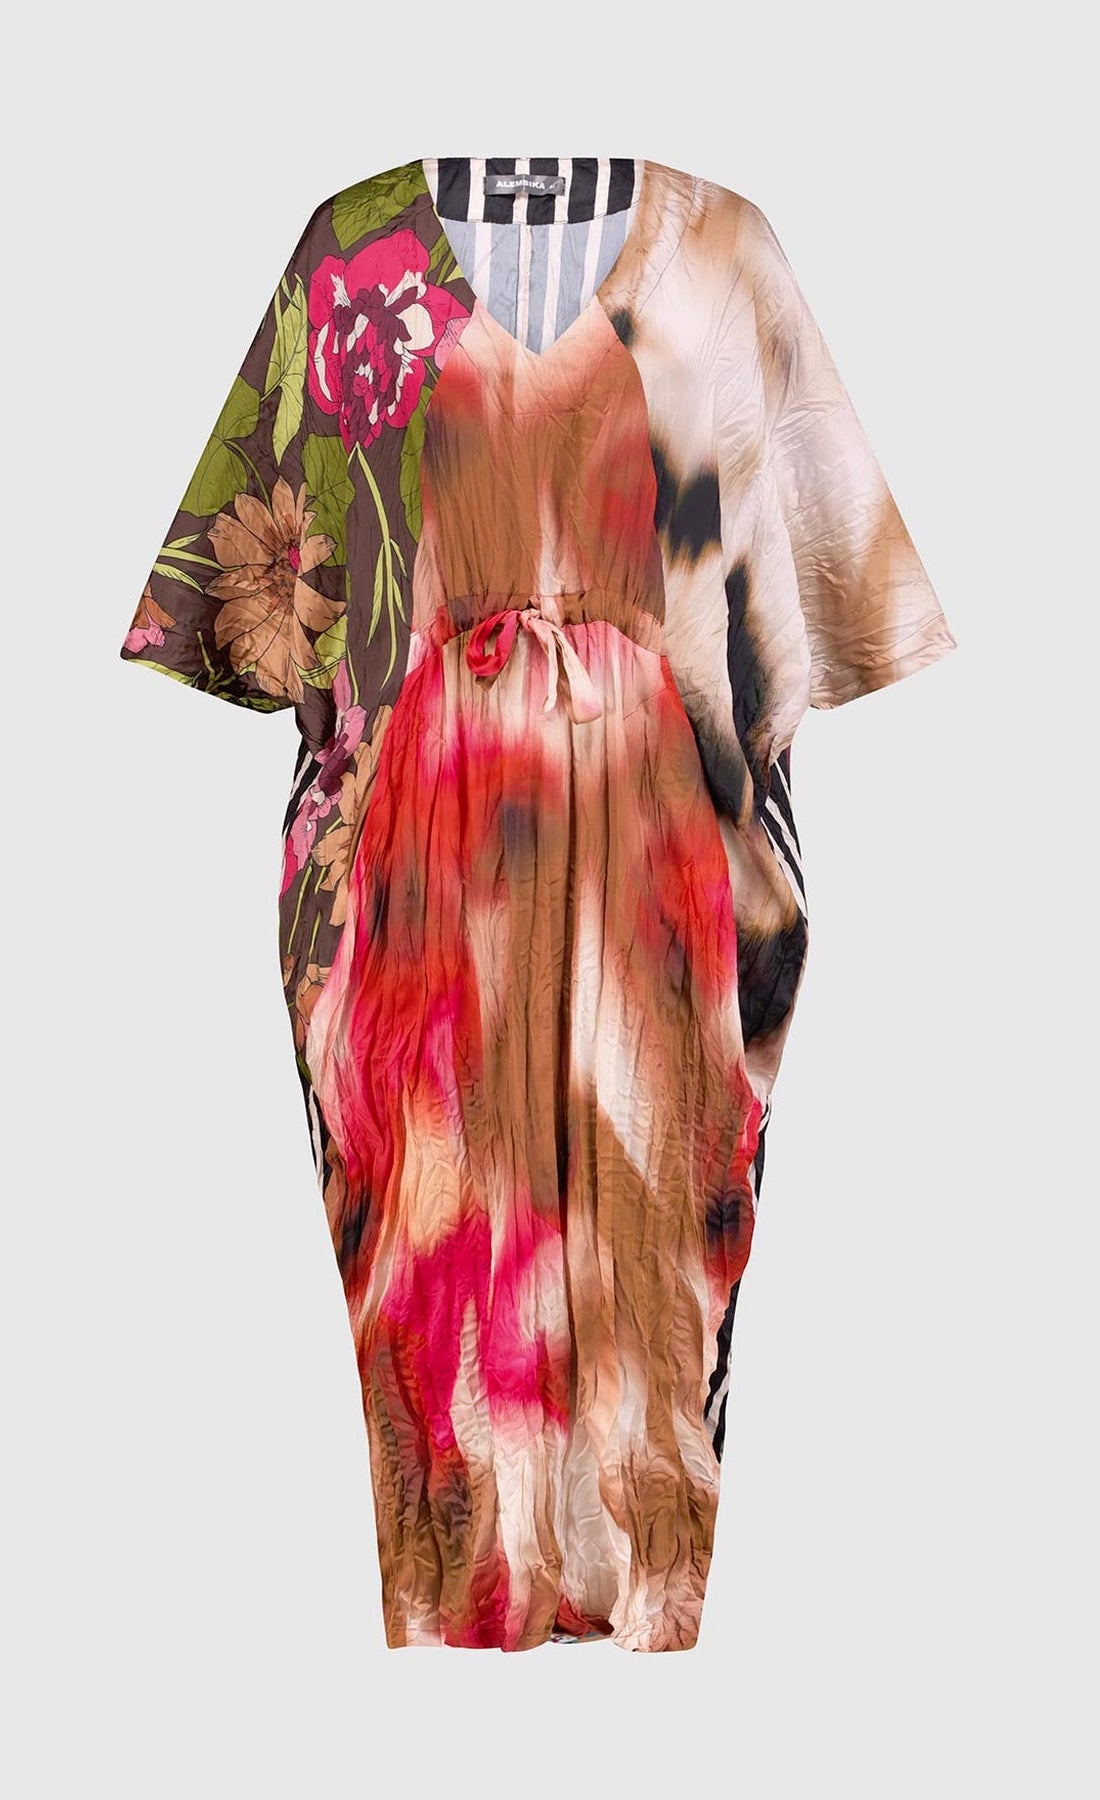 Front view of the alembika skye caftan butterfly dress. This dress has pink flowers over a brown backdrop on the right side, a pink and brown tie dye print in the center, a beige and brown tie dye print on the left side, and a black and white striped print on the back.